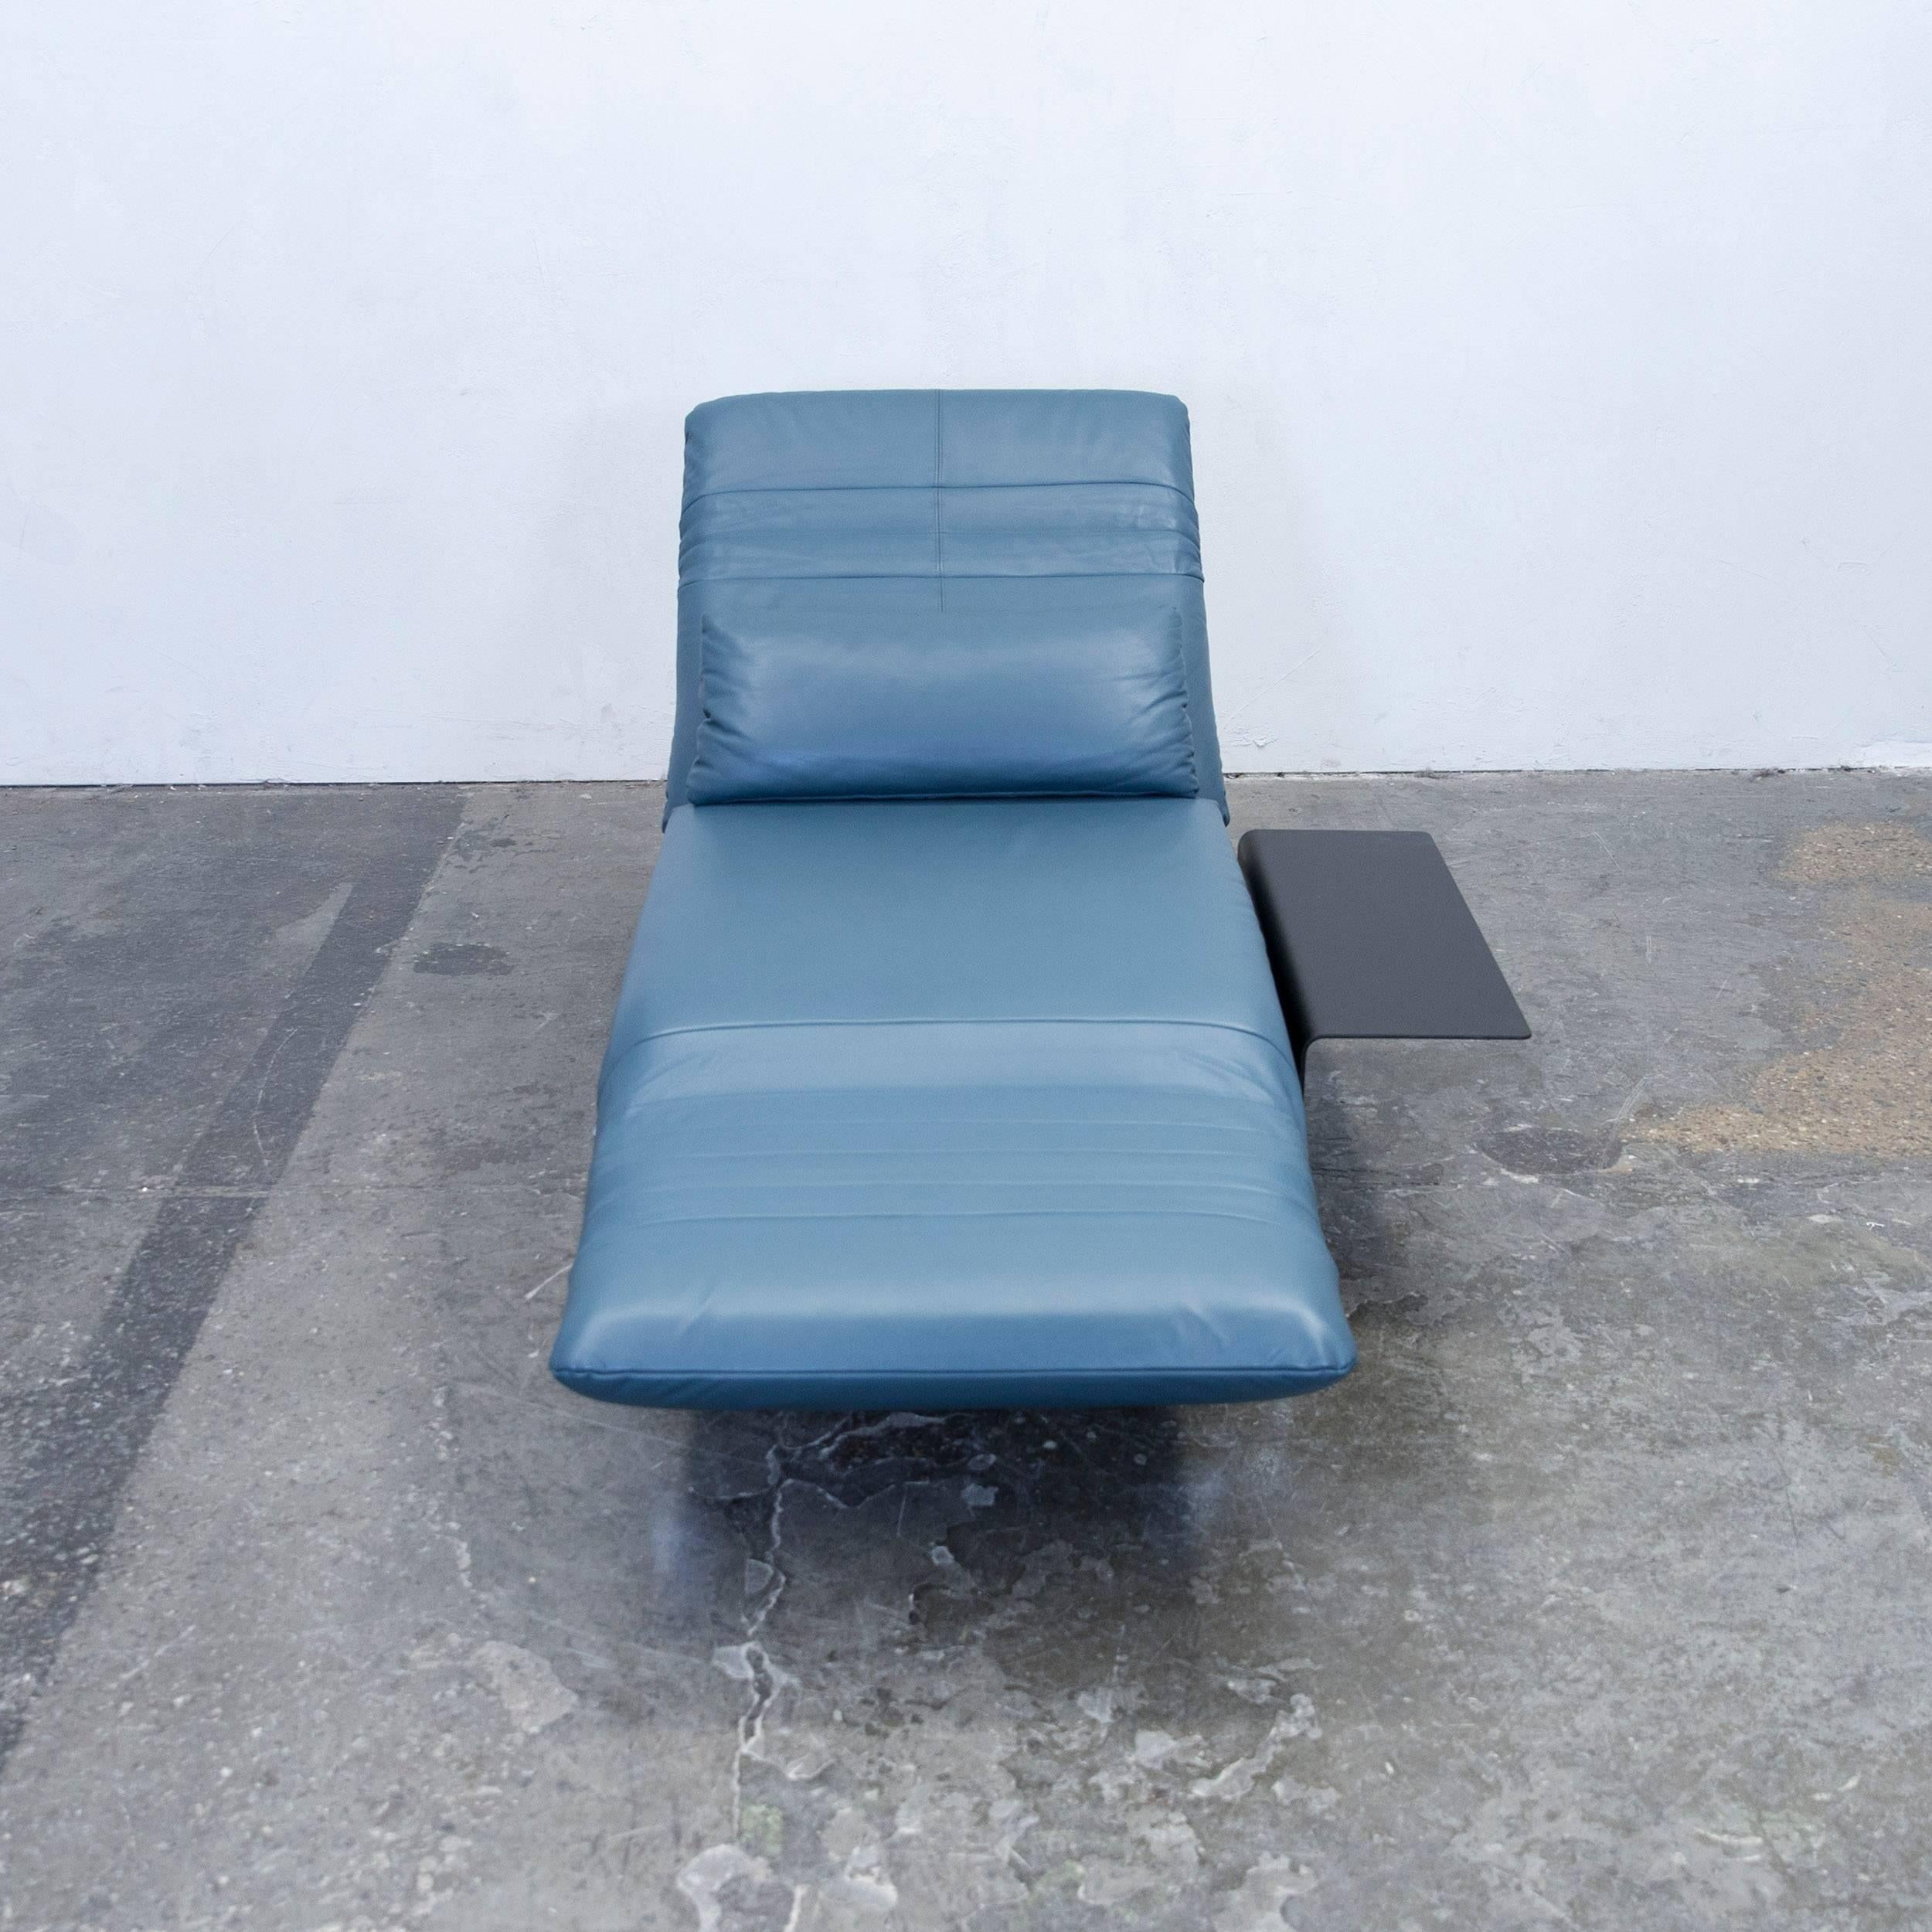 Rolf Benz Plura Designer Chair Leather Blue Function Couch Modern In Good Condition For Sale In Cologne, DE